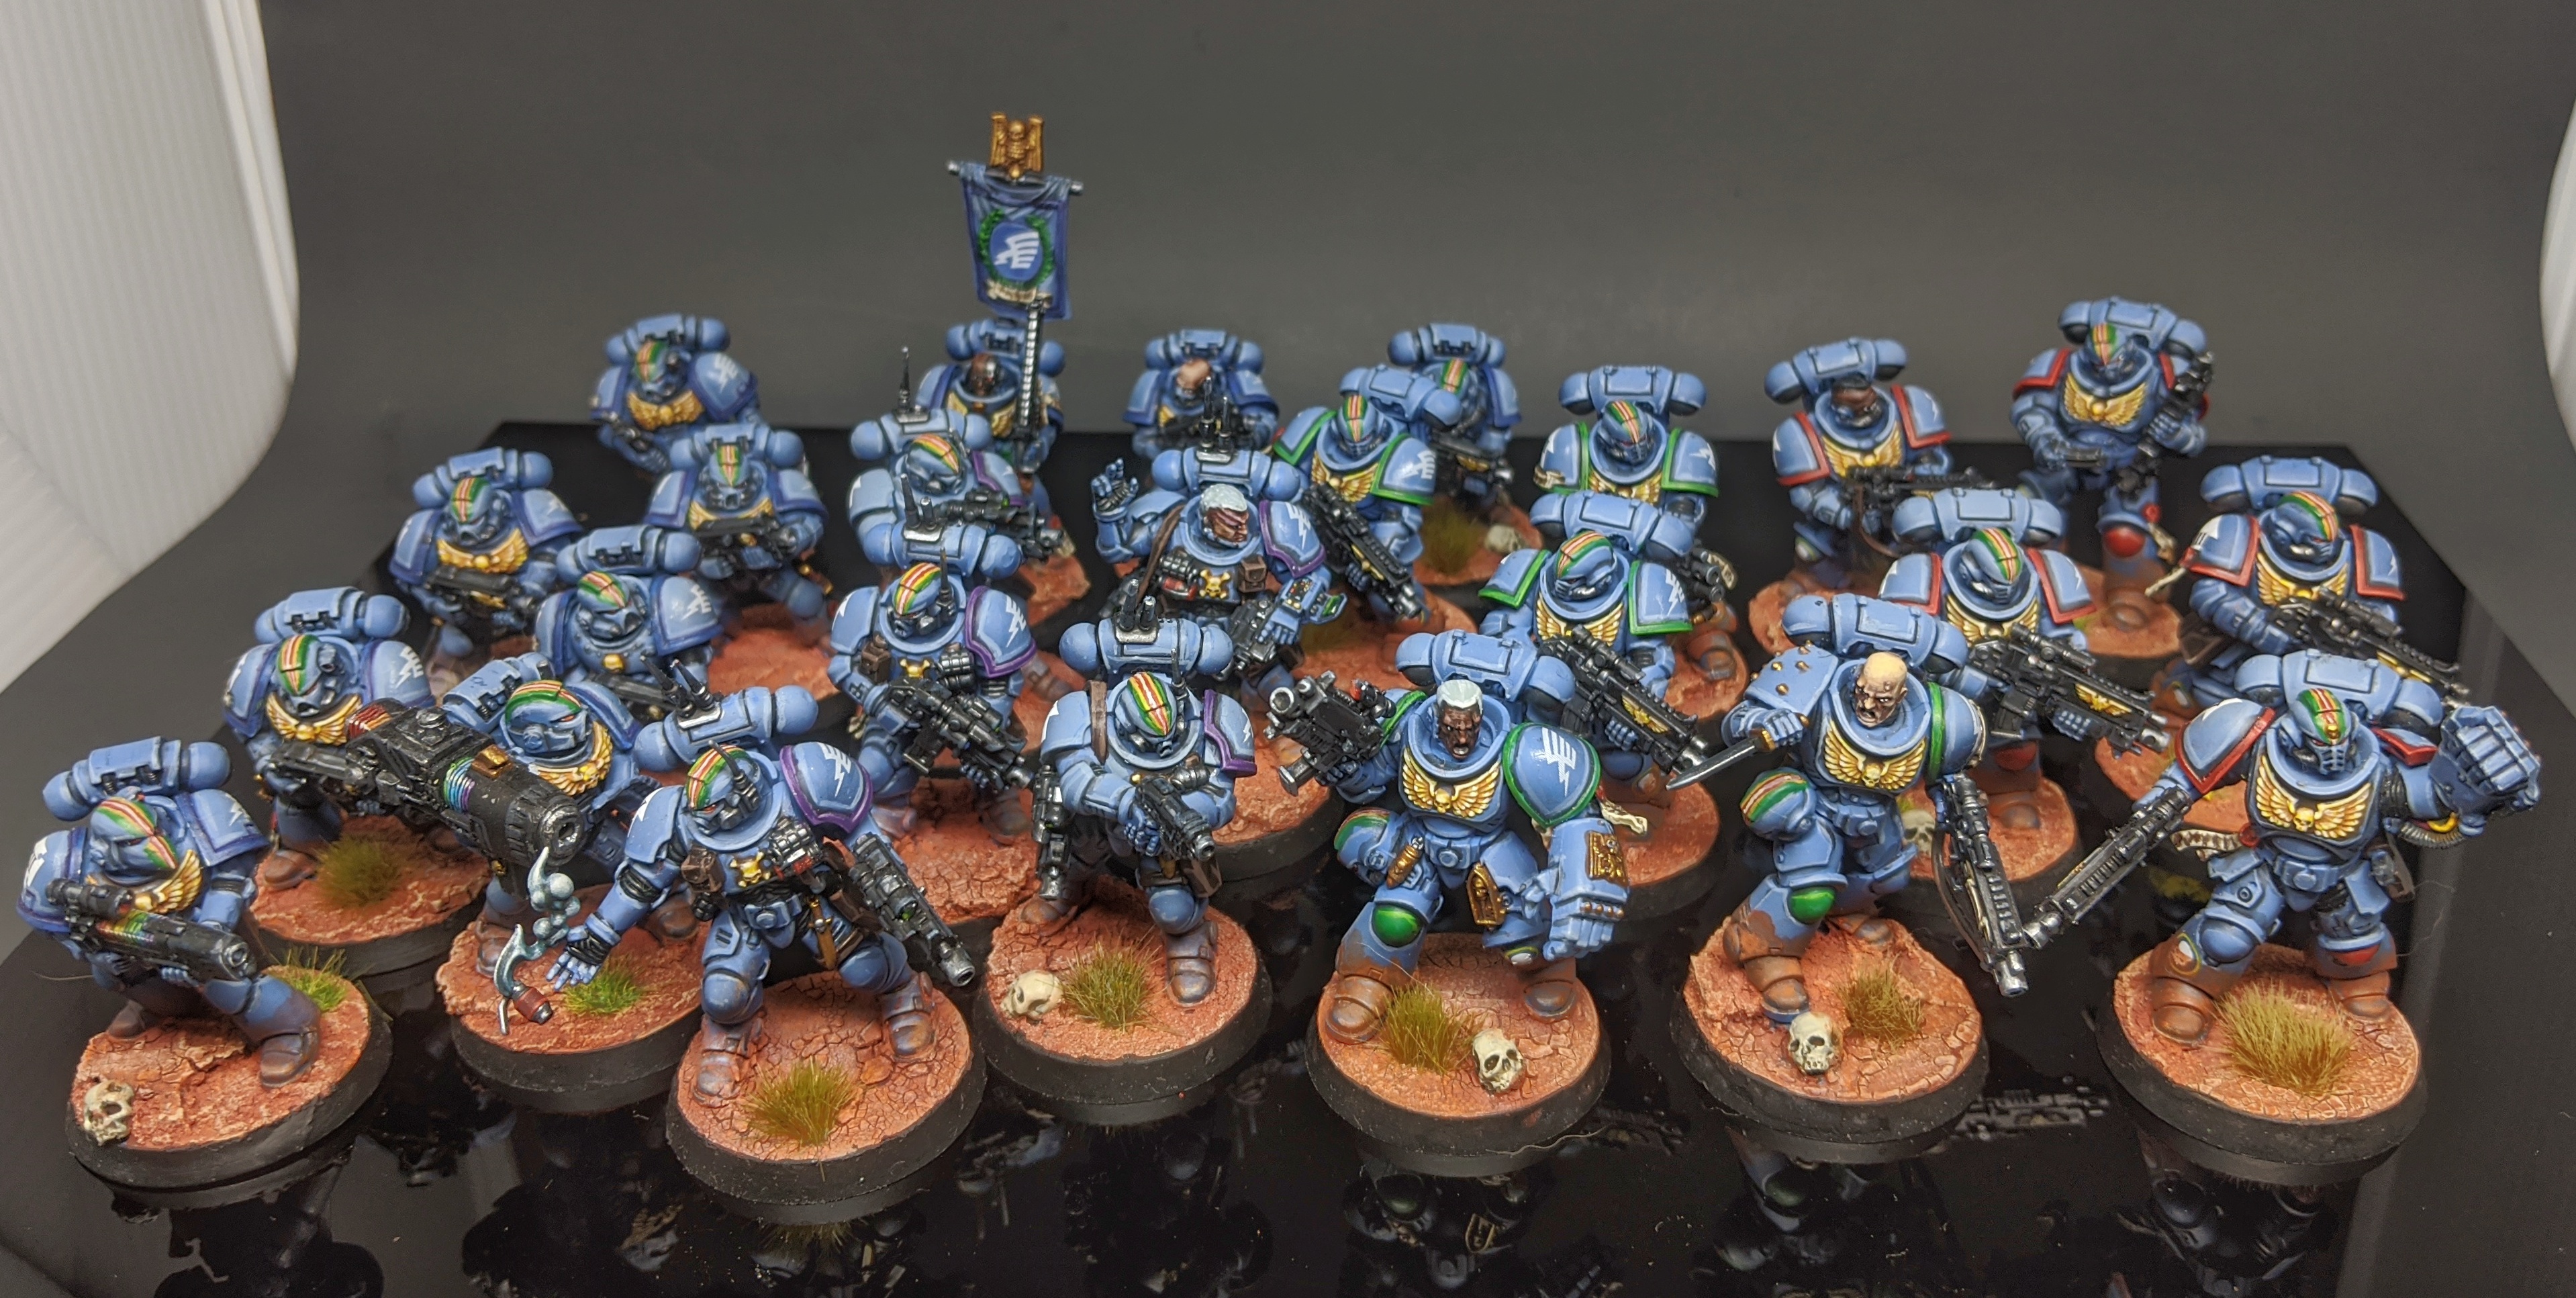 Rainbow Warriors Intercessors, Tactical Marines, and Infiltrators by Craig "MasterSlowPoke" Sniffen